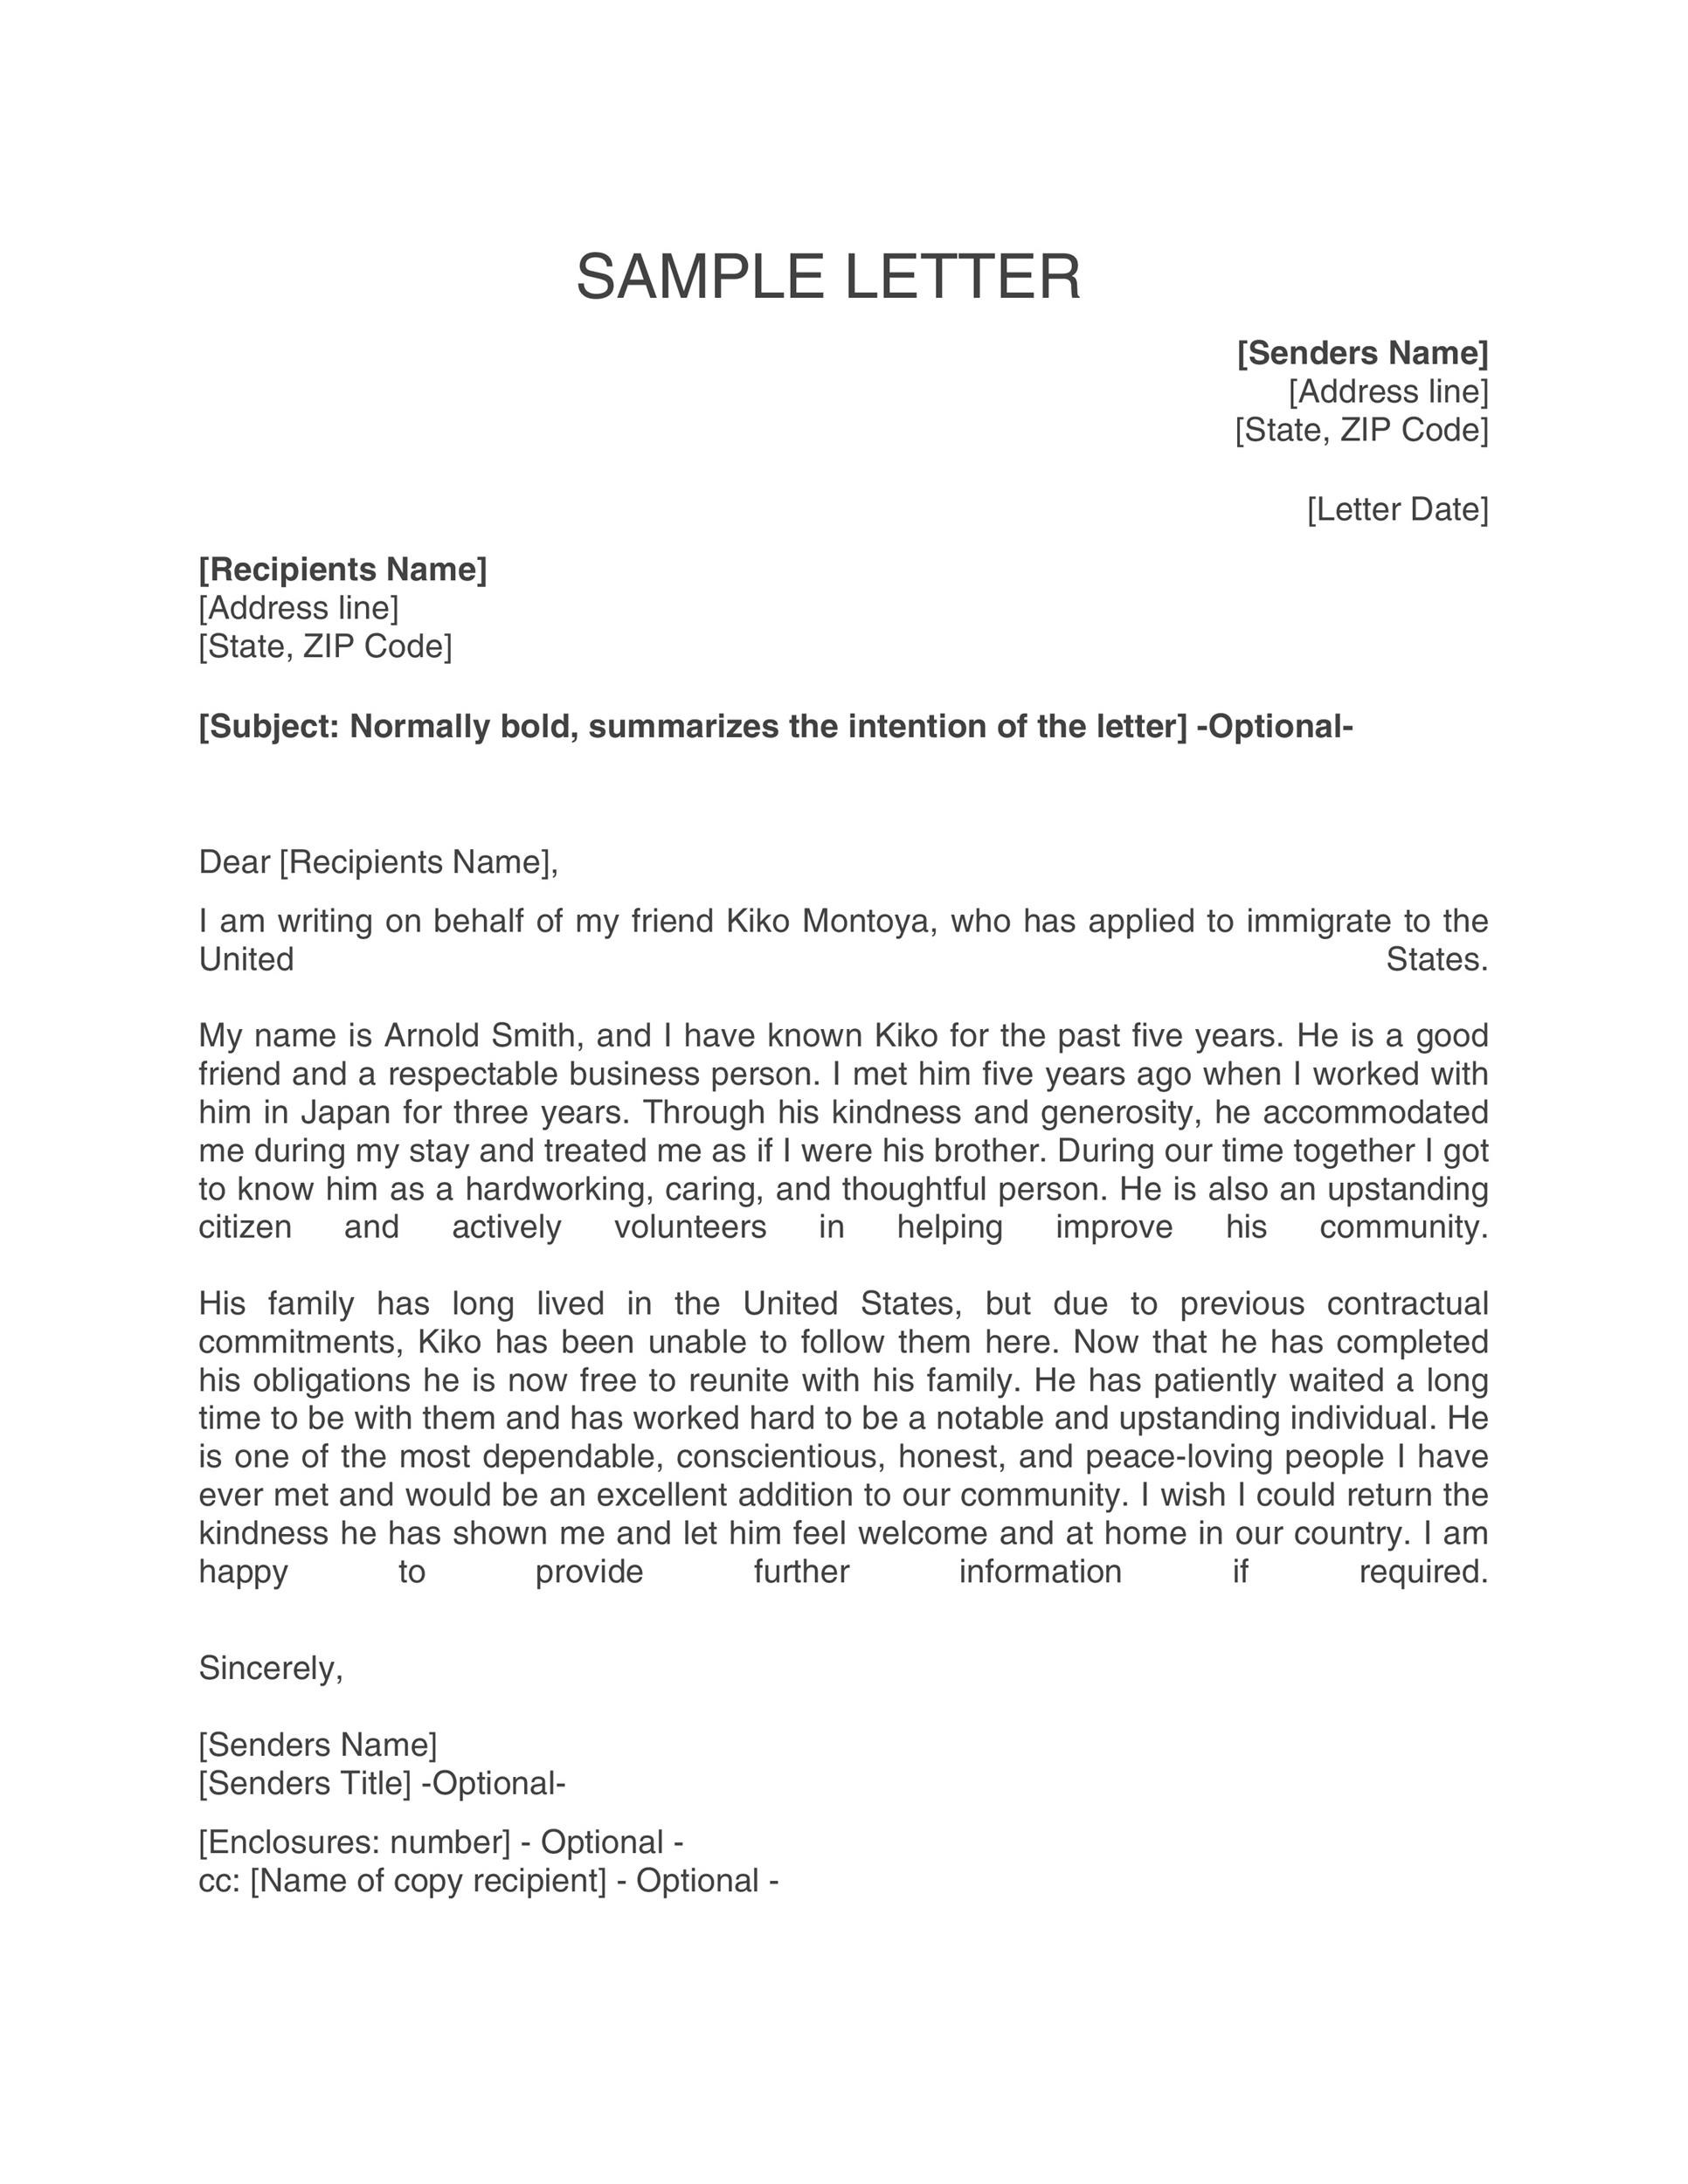 Job Letter For Immigration Purpose from templatelab.com